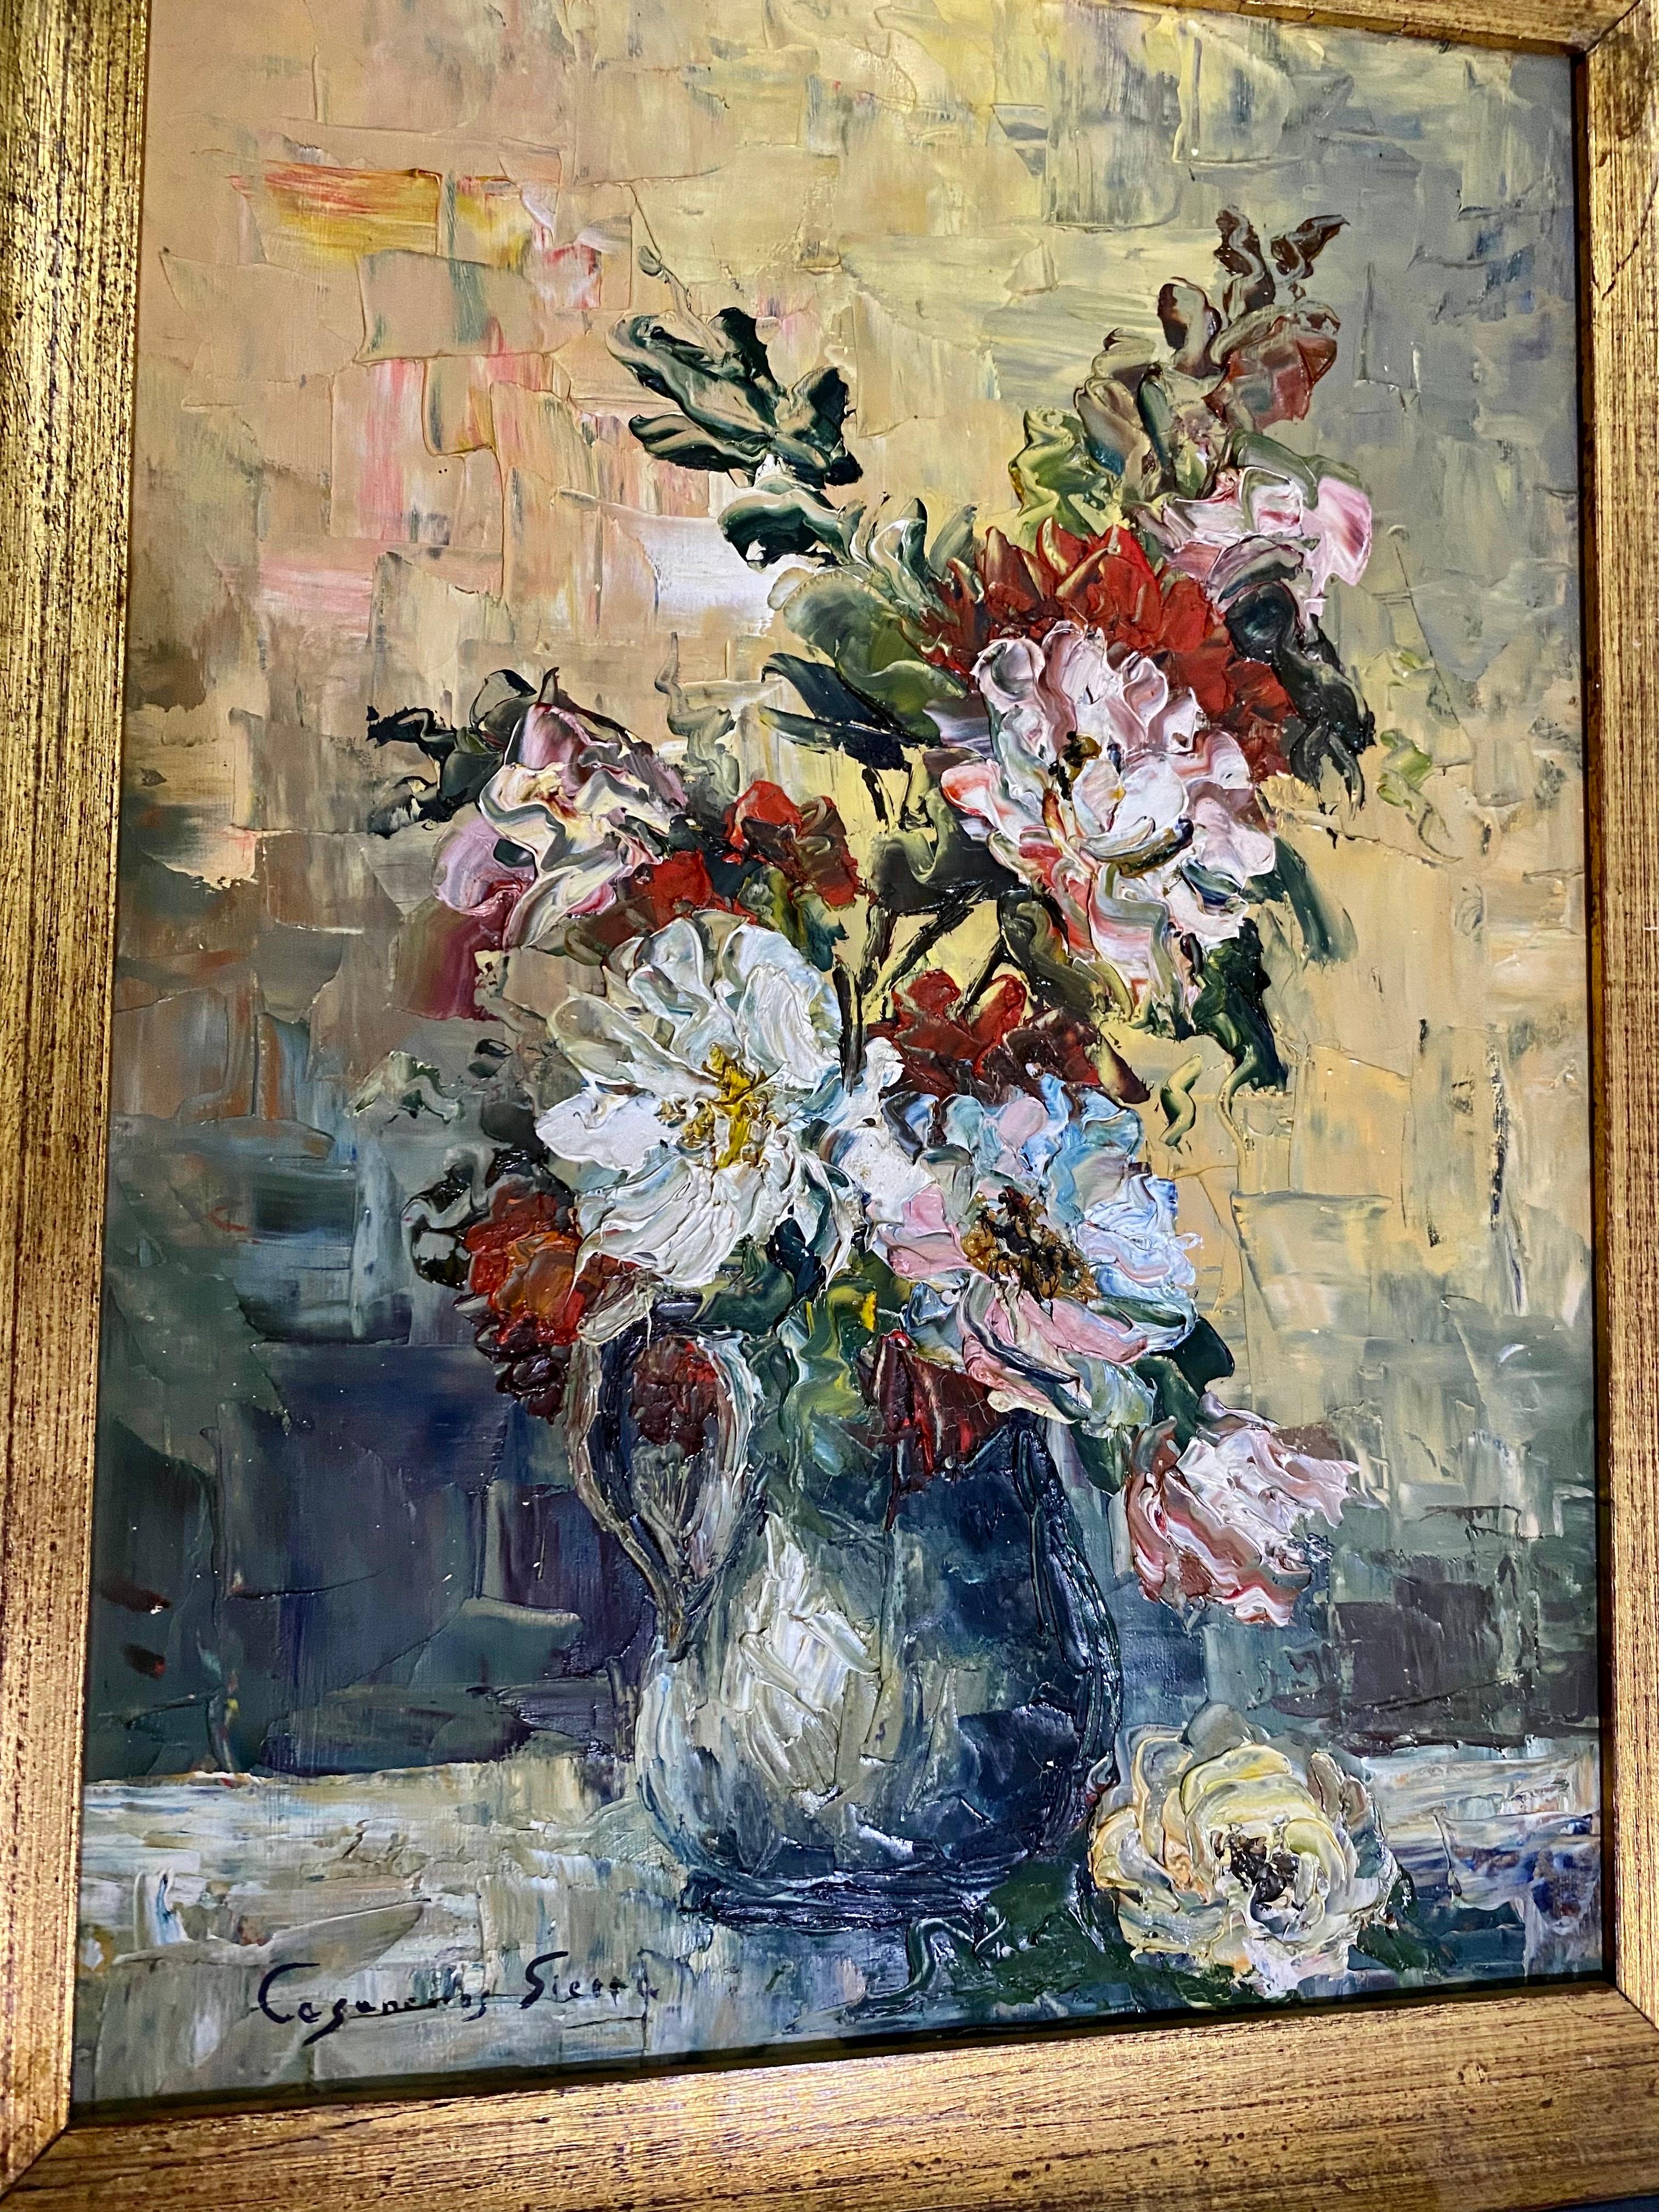 This Spanish still life knife oil painting captures a scene of a large bouquet of ancient rose flowers?  purple, pink, white j'hece and Bordeaux in a green tinted glass jug.  It is lying on a fabric, the bouquet is very harmonious, a graceful